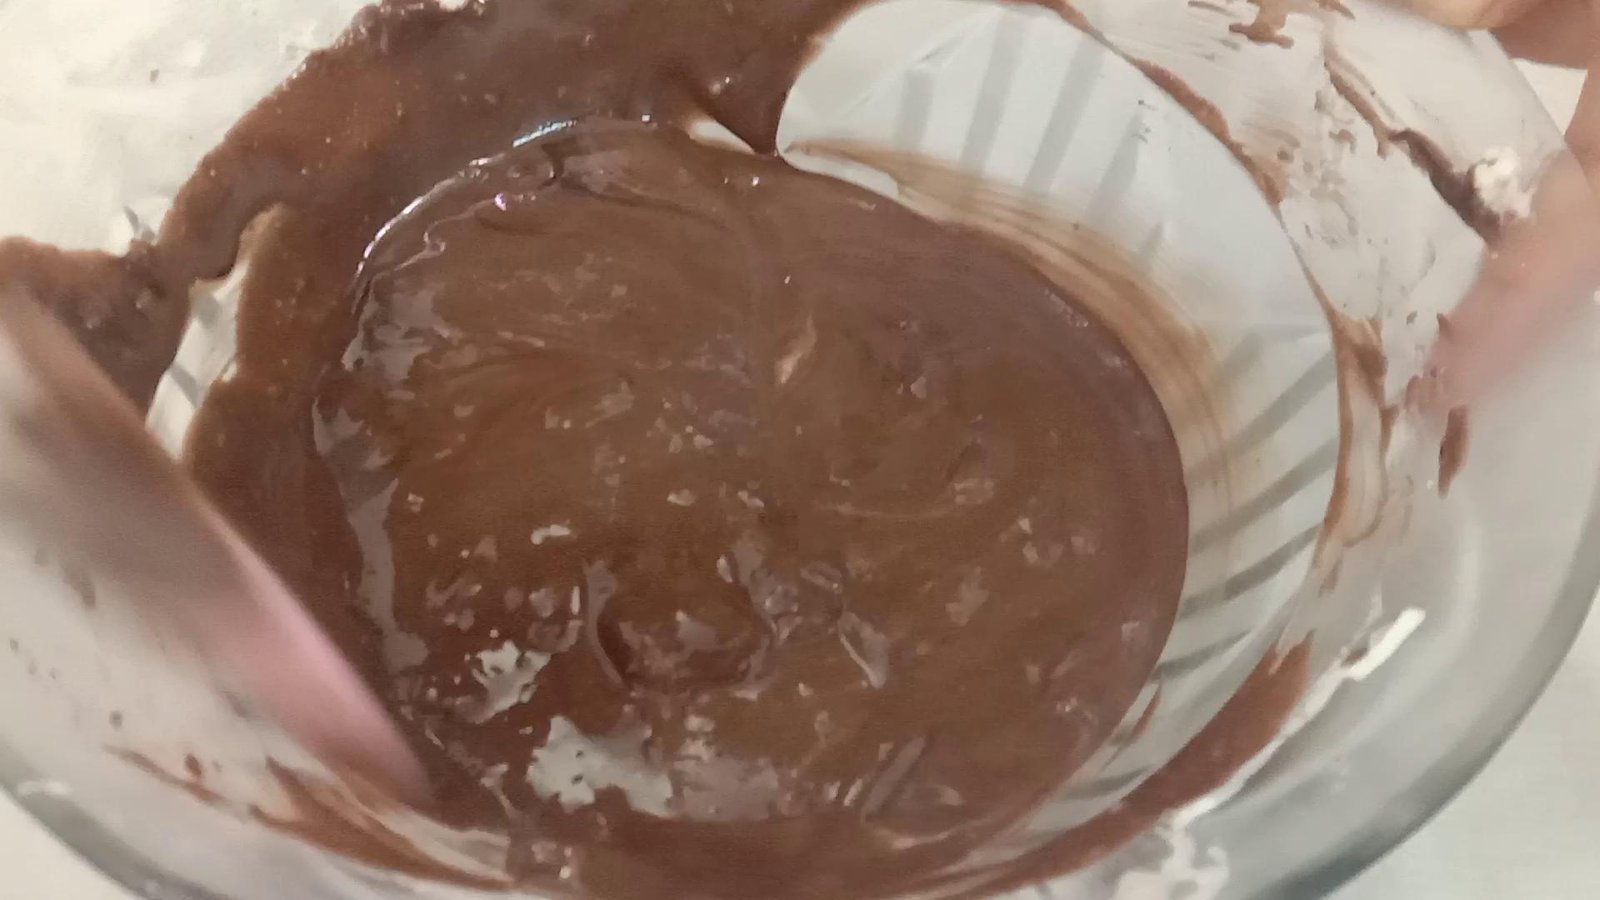 Mixing cream and chocolate, Chocolate mousse recipe. 